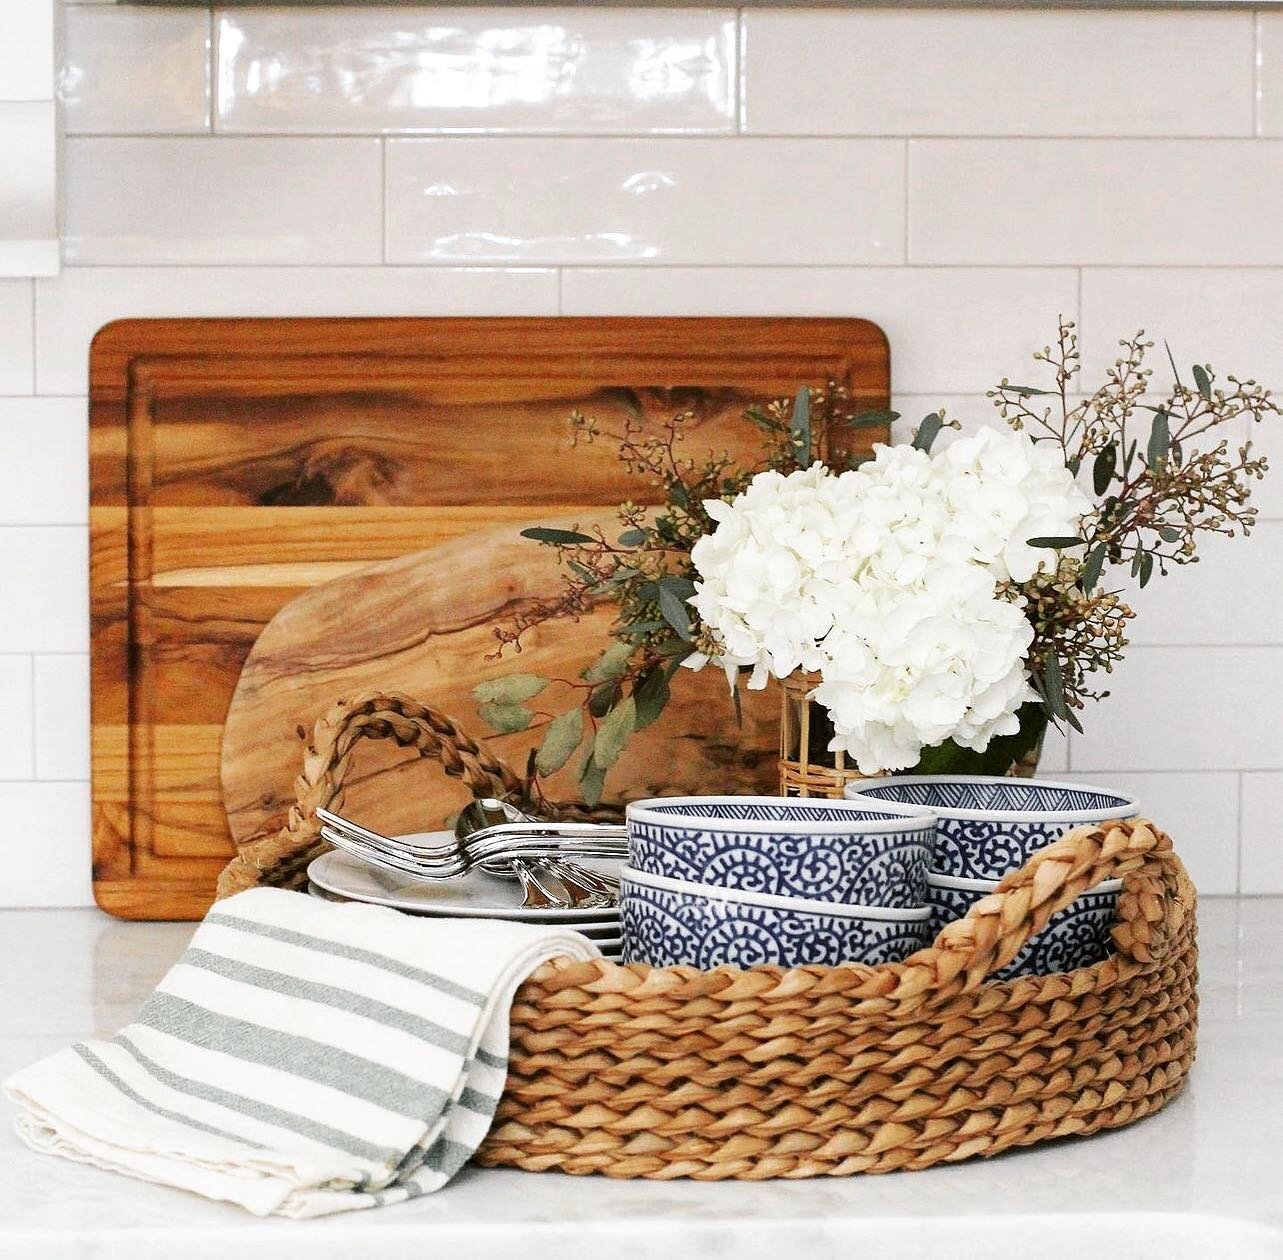 Styling your kitchen doesn't have to be hard. Gathering a few pretty things on a seagrass tray does wonders. Make sure to add some flowers to bring in spring. Don&rsquo;t be a afraid to change it up with each season. 💙  #kitchenstyle #kitchenstyling